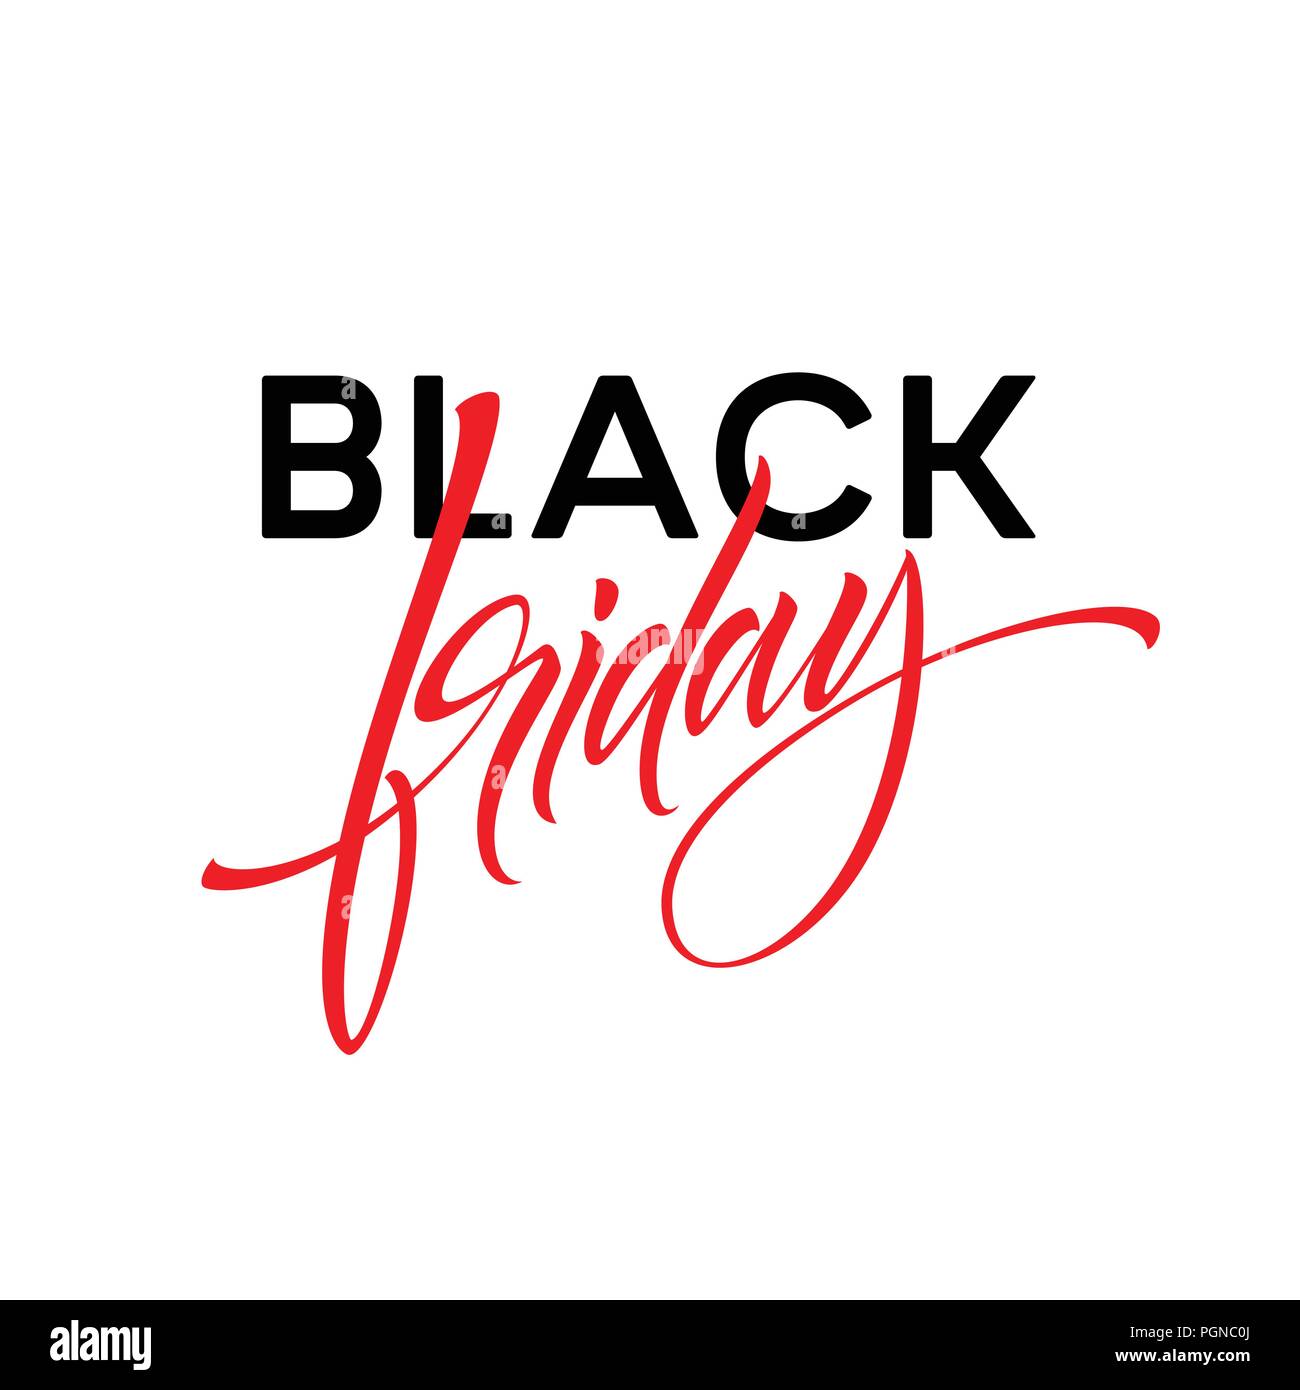 Black Friday Lettering design for advertising, banners, leaflets and flyers. Vector illustration Stock Vector